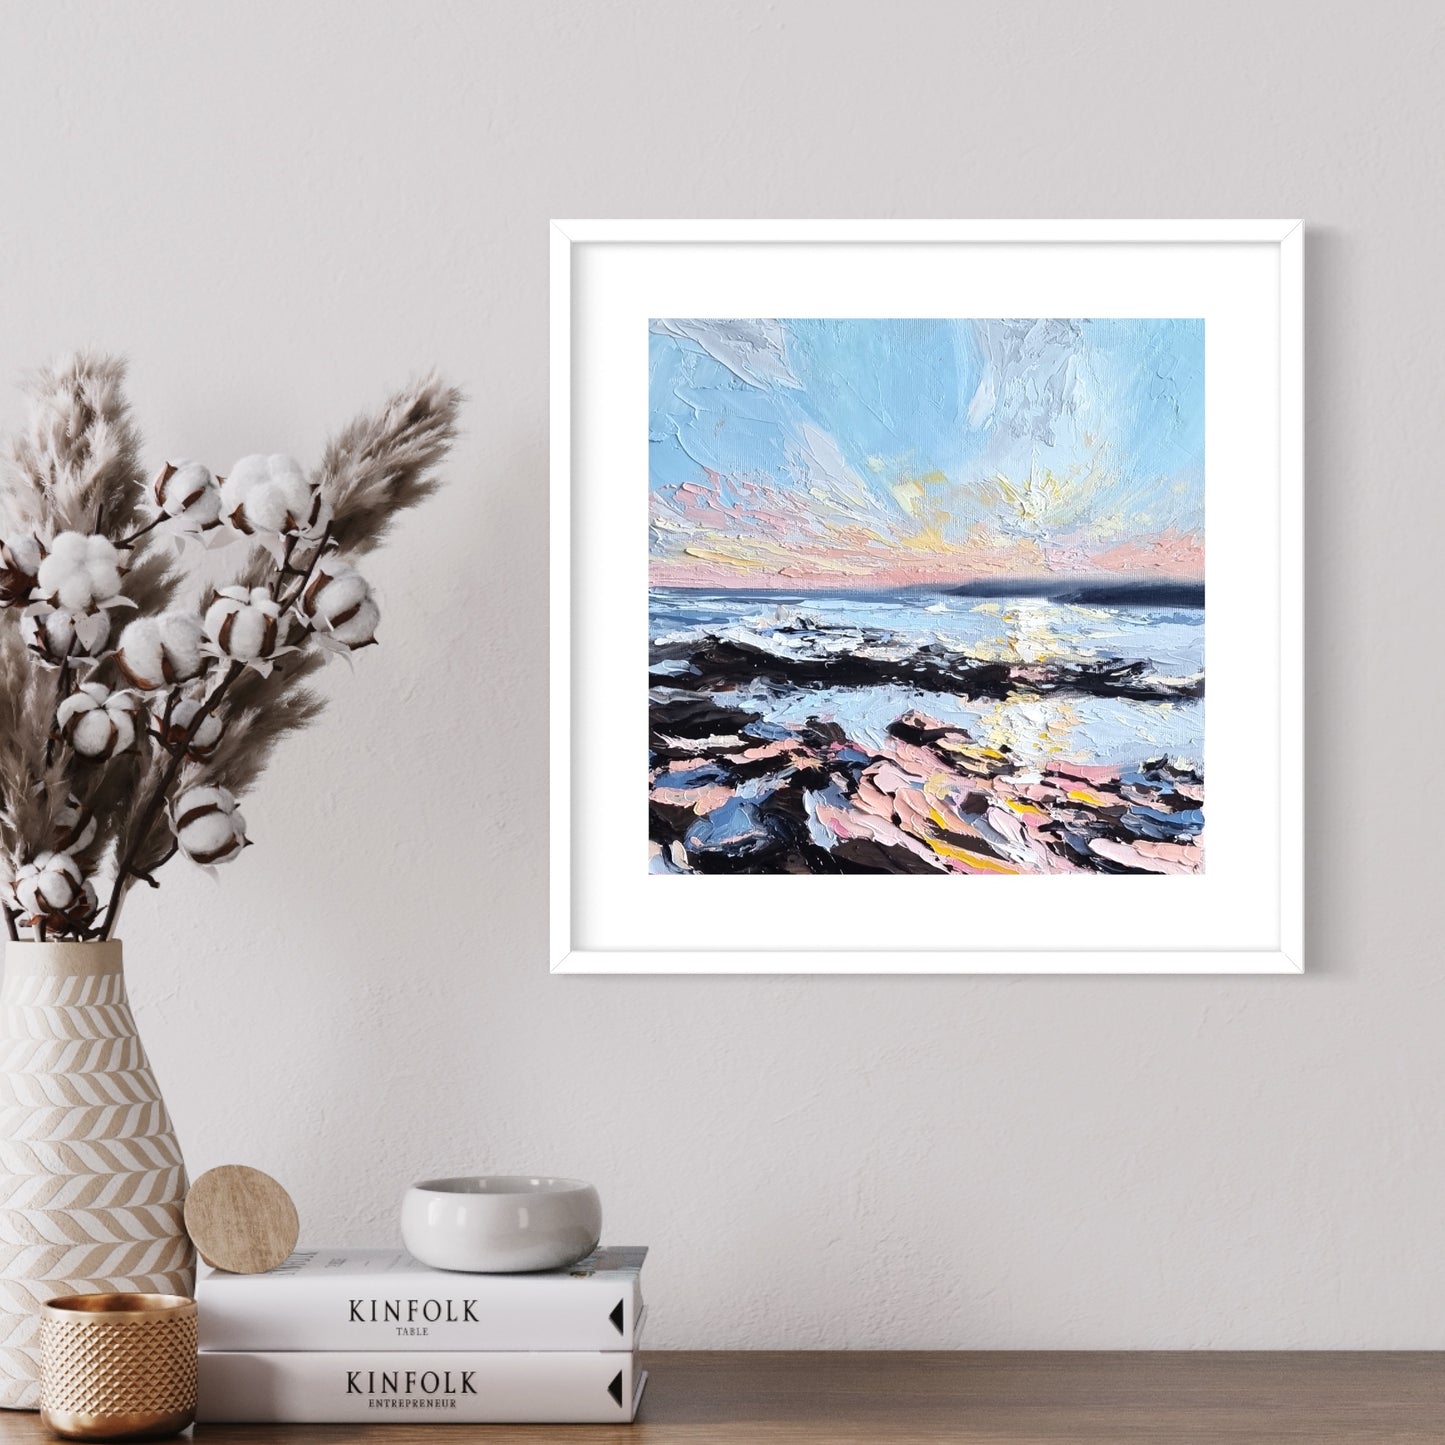 An original oil painting capturing the colours of a sunset sky along the coast